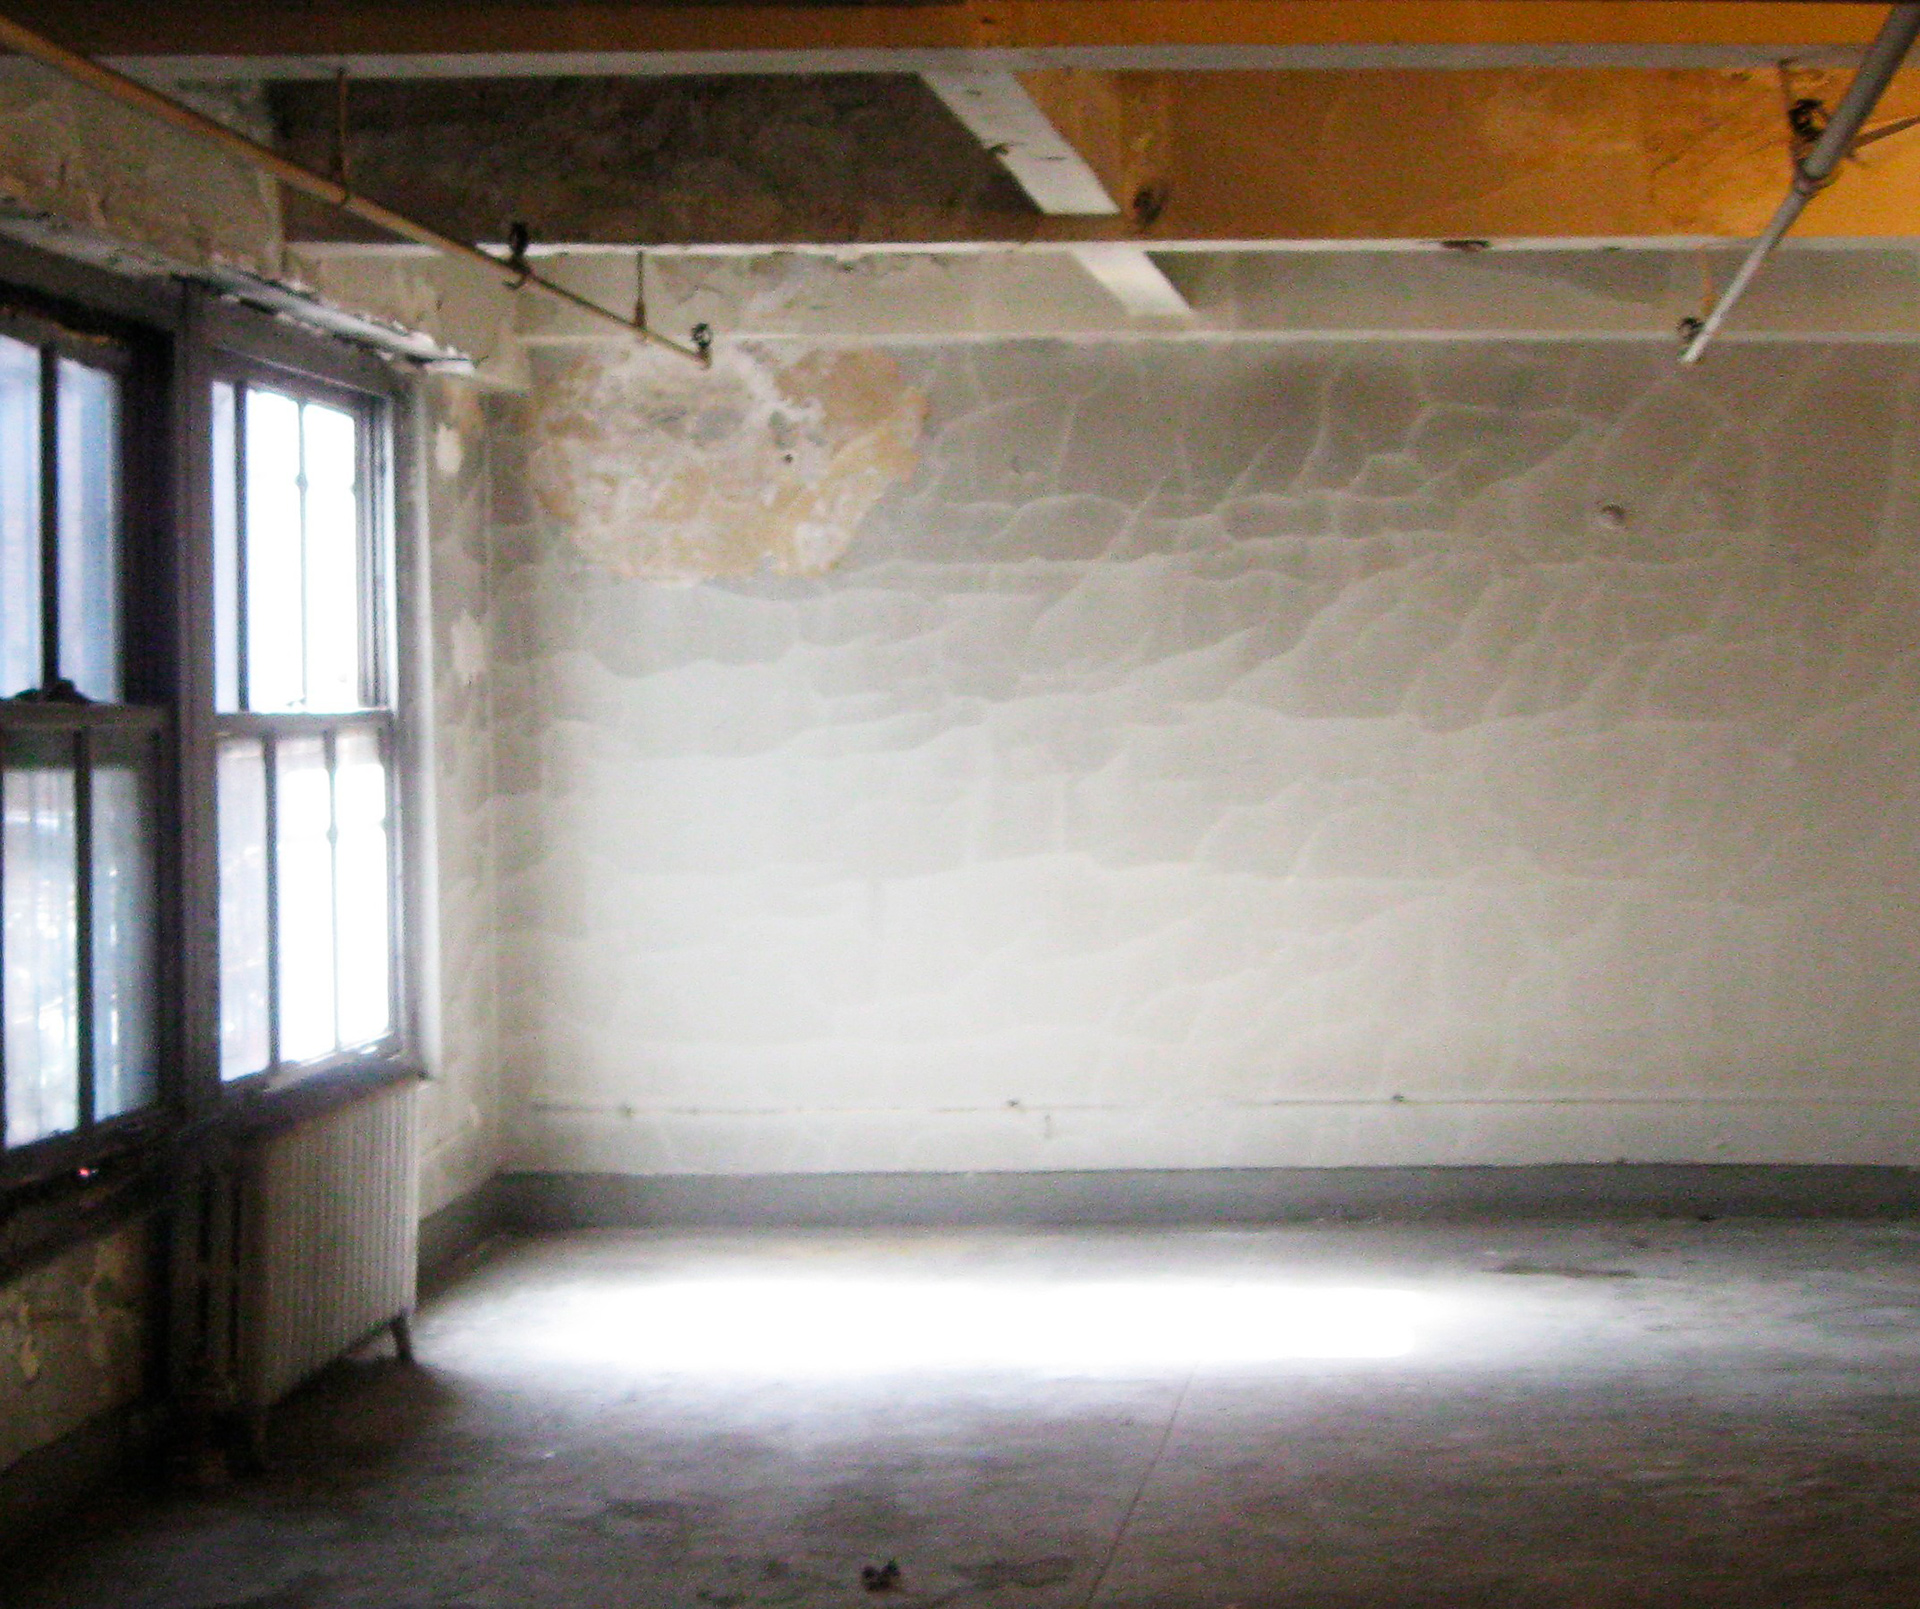 Existing conditions of a typical floor at 114 East 25th Street prior to building renovation